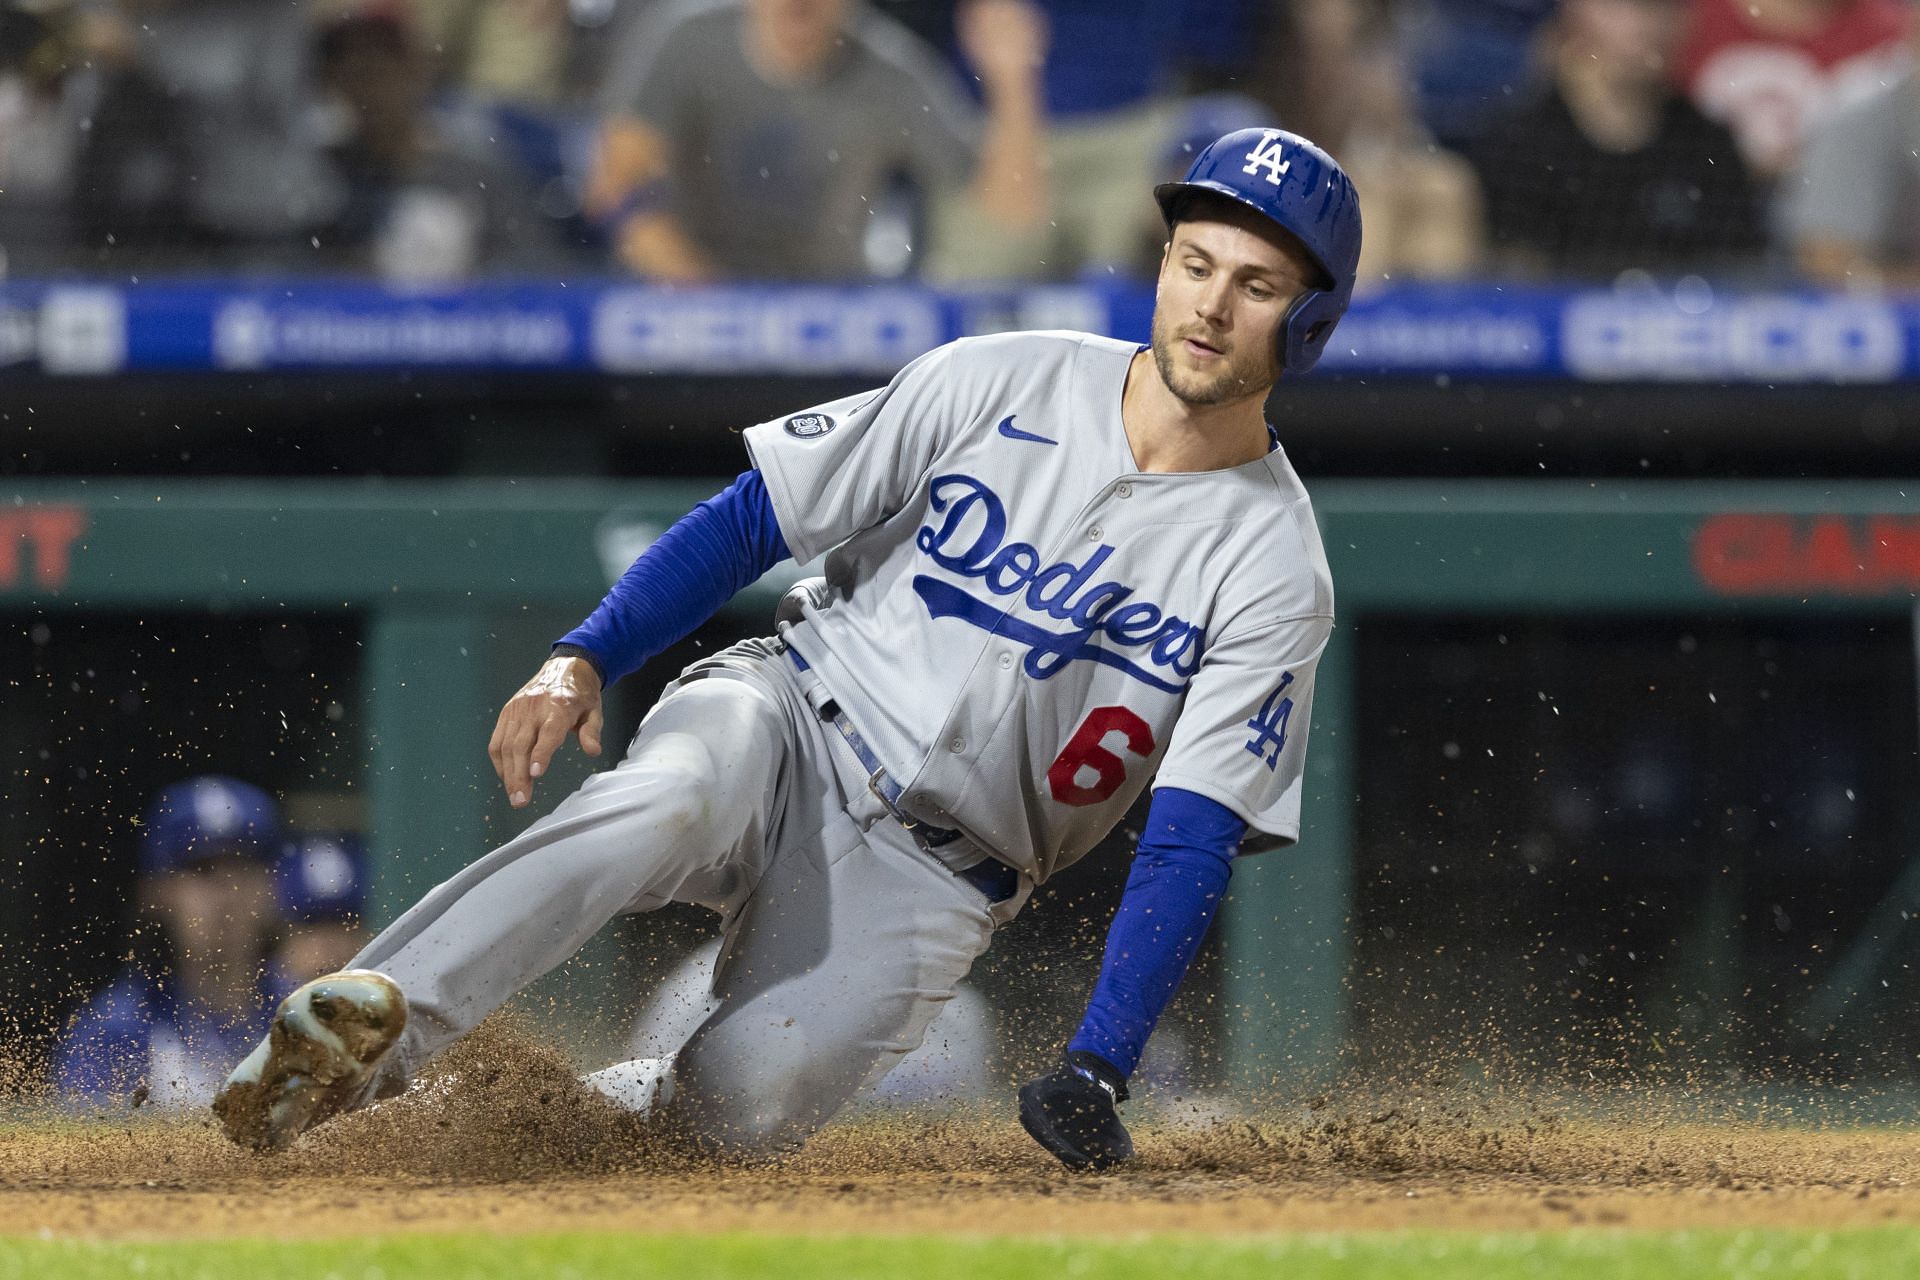 Kemp got absolutely robbed by the cheater that year The real 2011 MVP -  Los Angeles Dodgers fans applaud Trea Turner's feat while being reminded  what happened to Matt Kemp in the